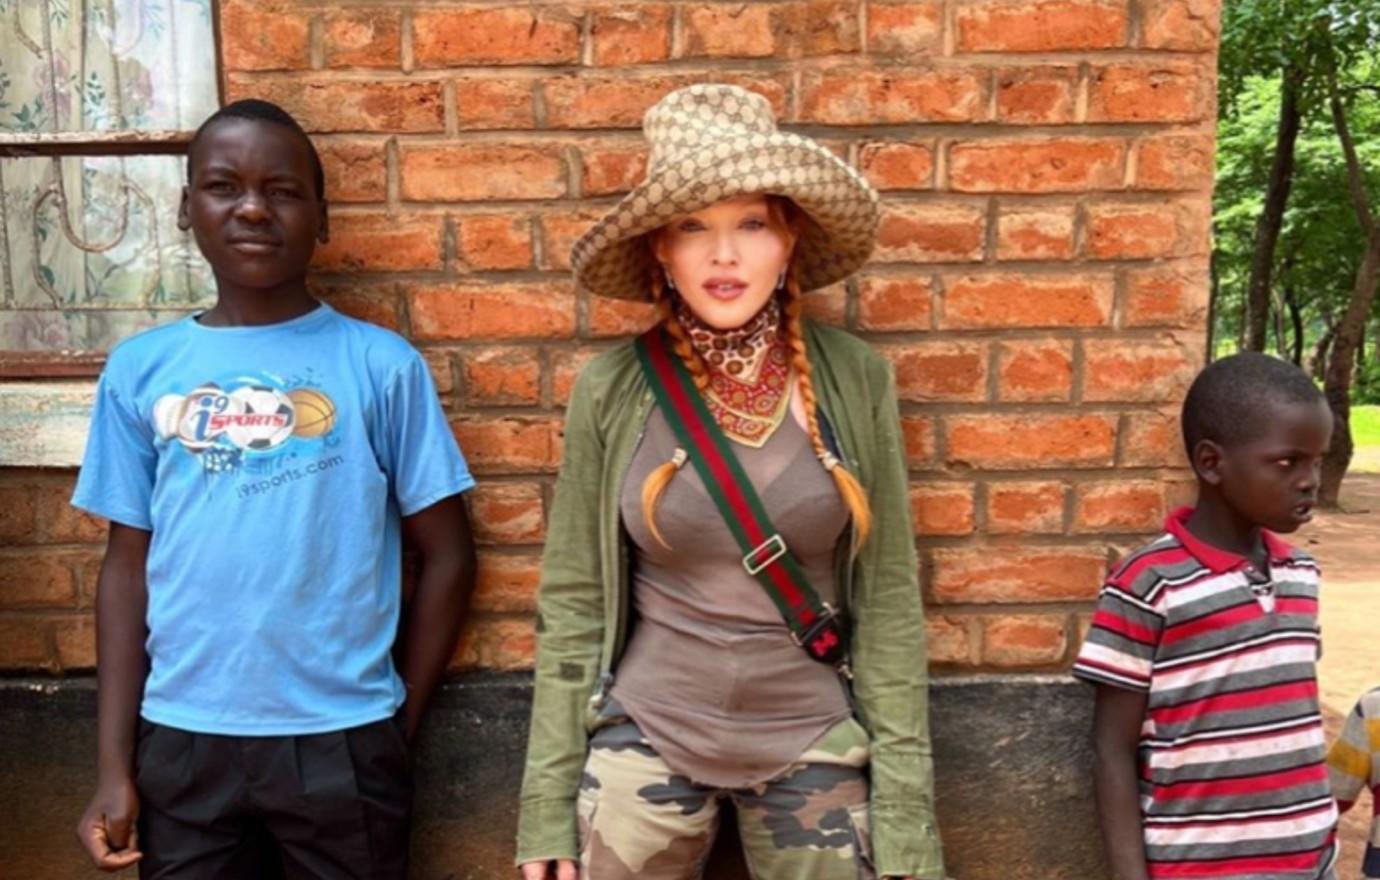 Madonna wears head-to-toe Gucci as she visits Malawi where four of